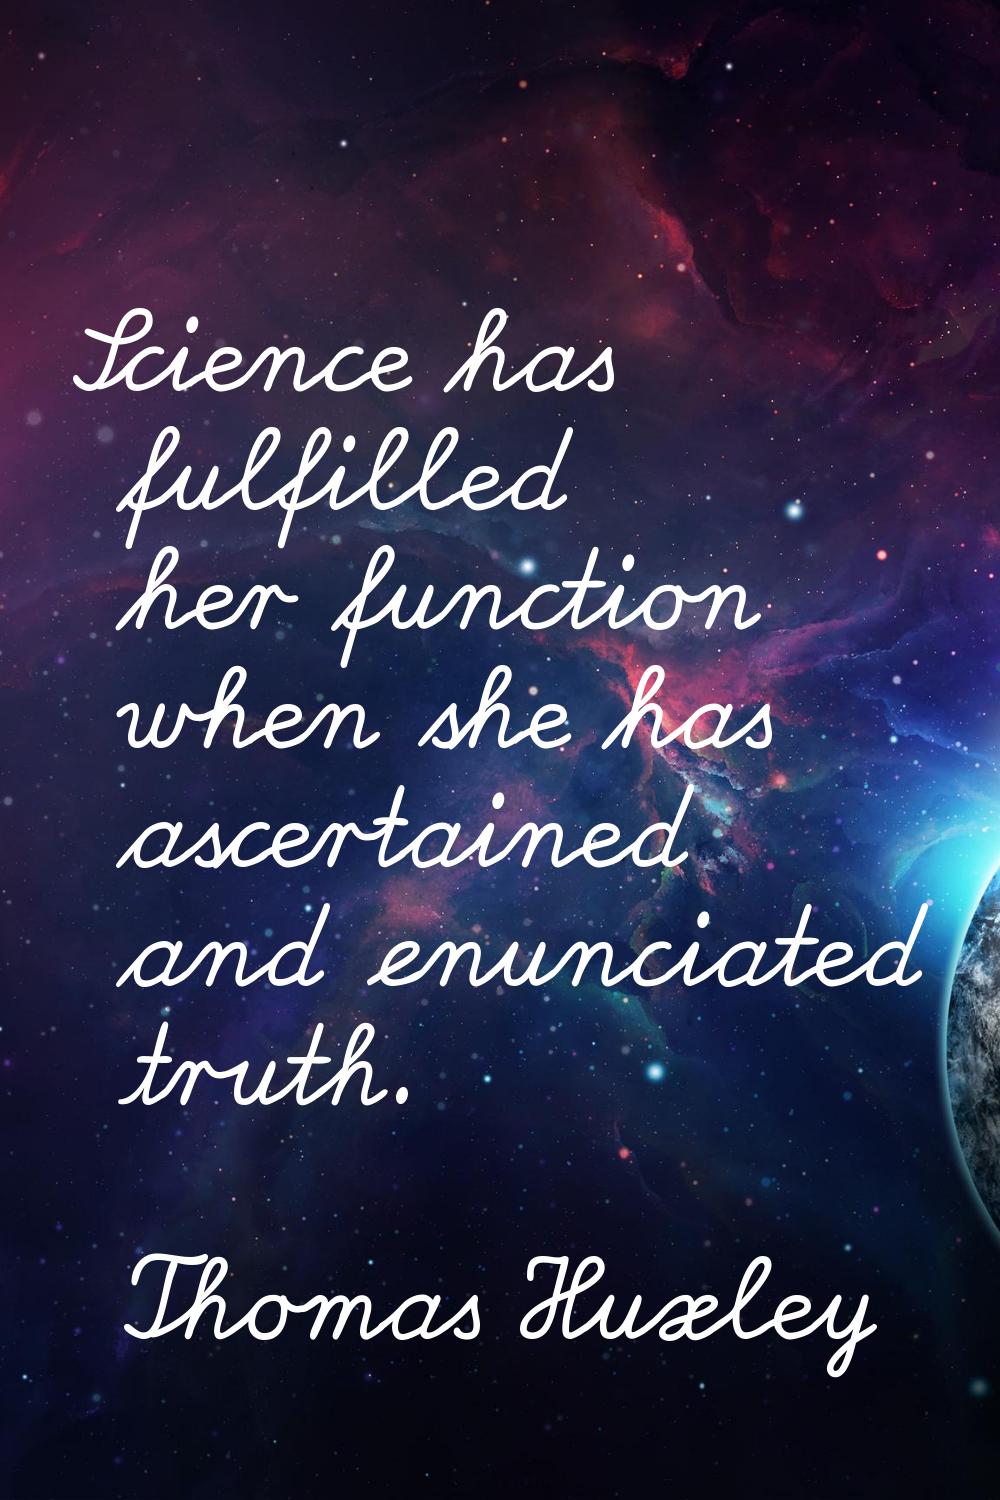 Science has fulfilled her function when she has ascertained and enunciated truth.